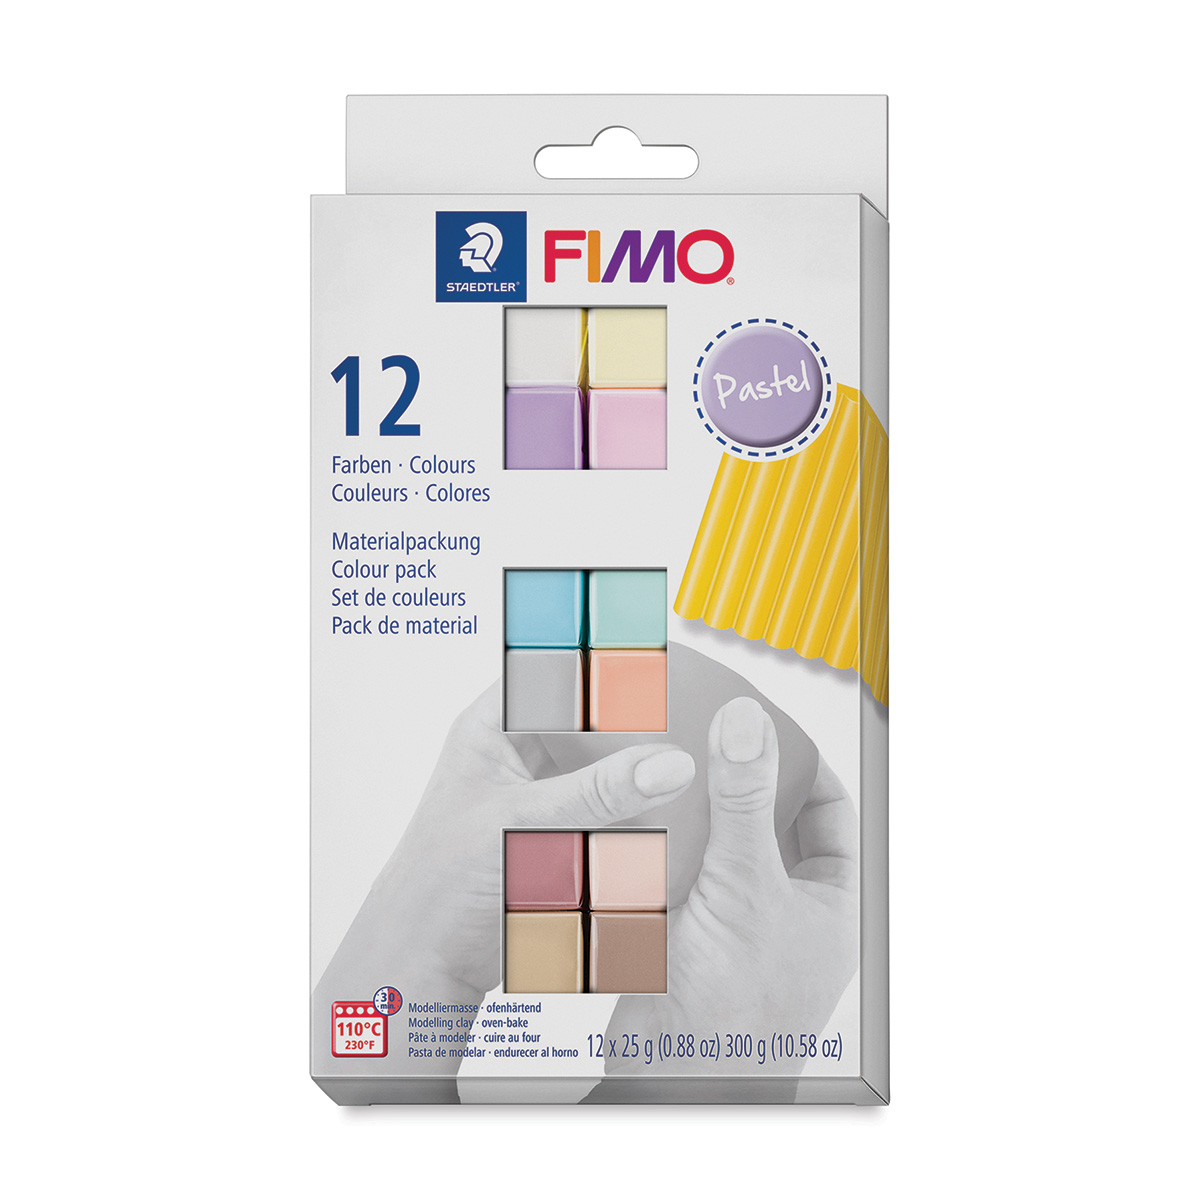 Staedtler Fimo Soft Polymer Clay 56.7g-Brilliant Blue 956 at a low